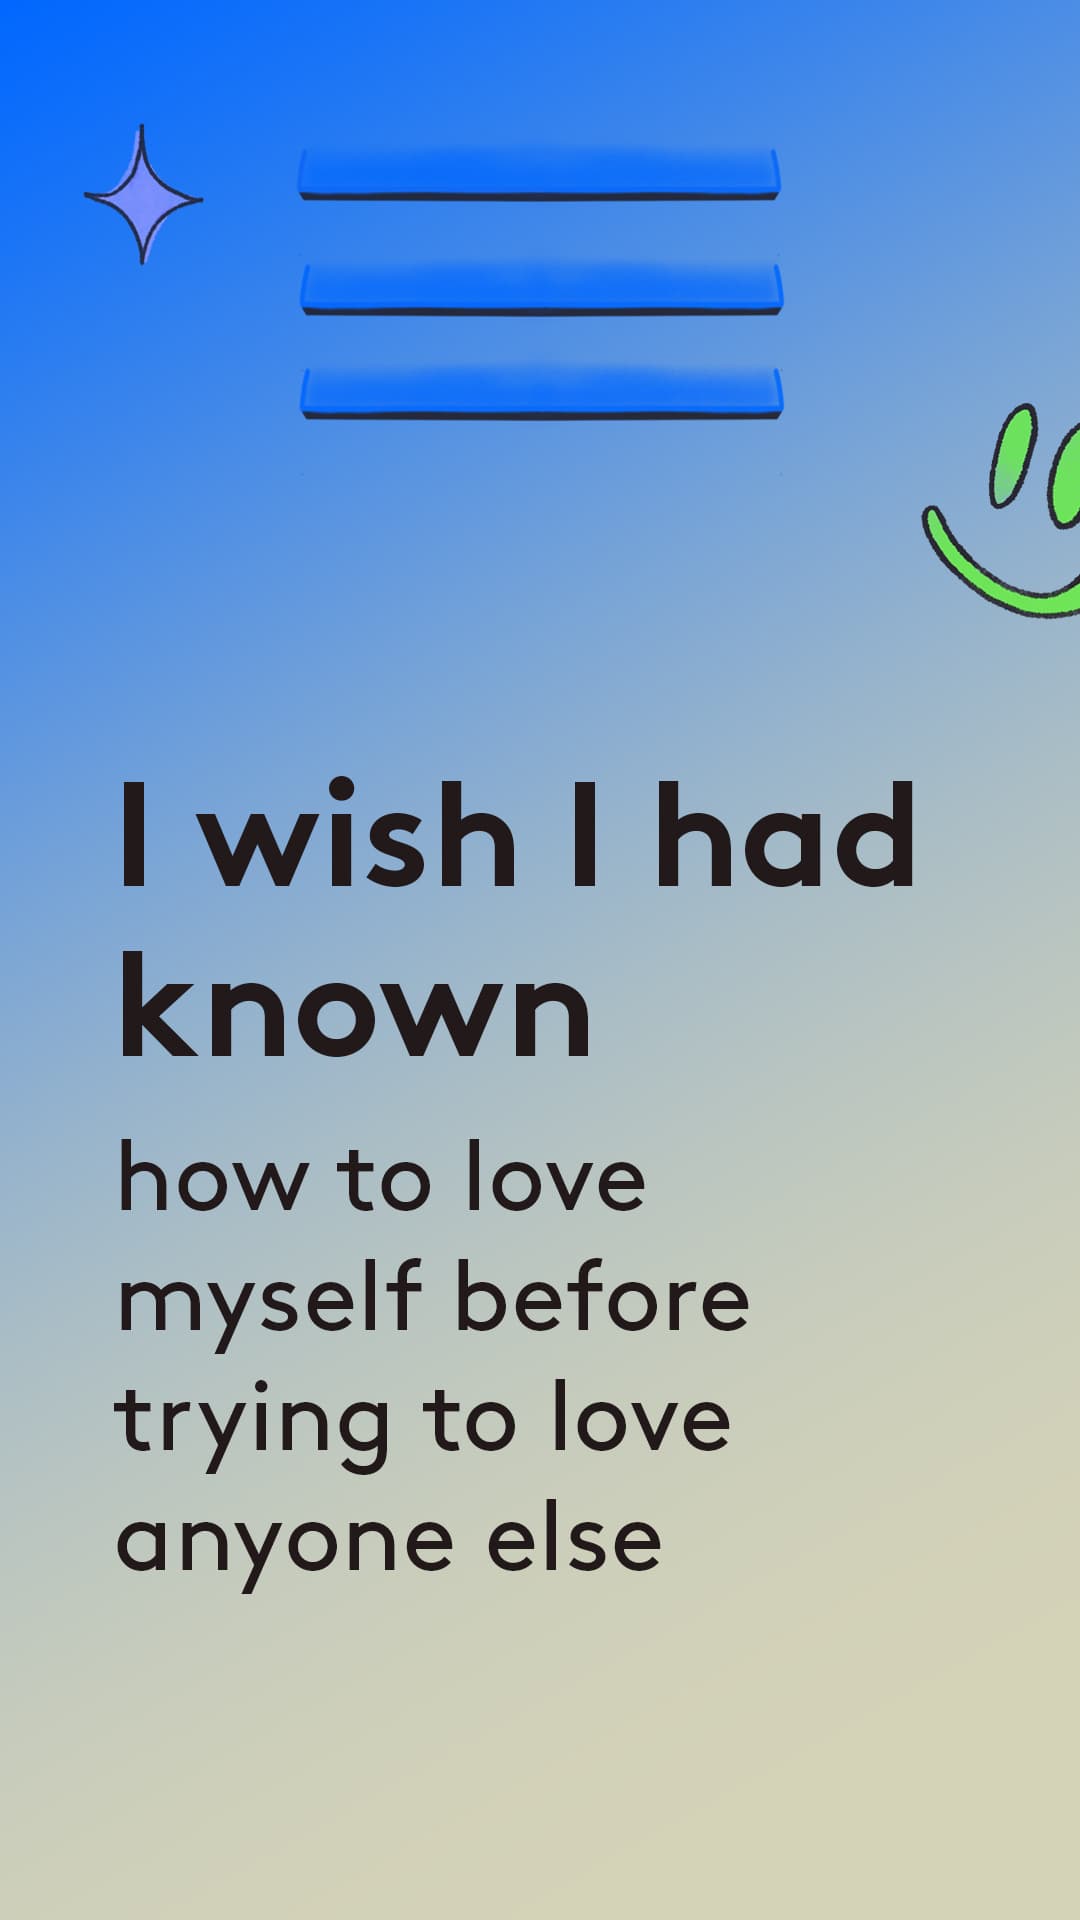 I wish i had known how to love myself before trying to love anyone else